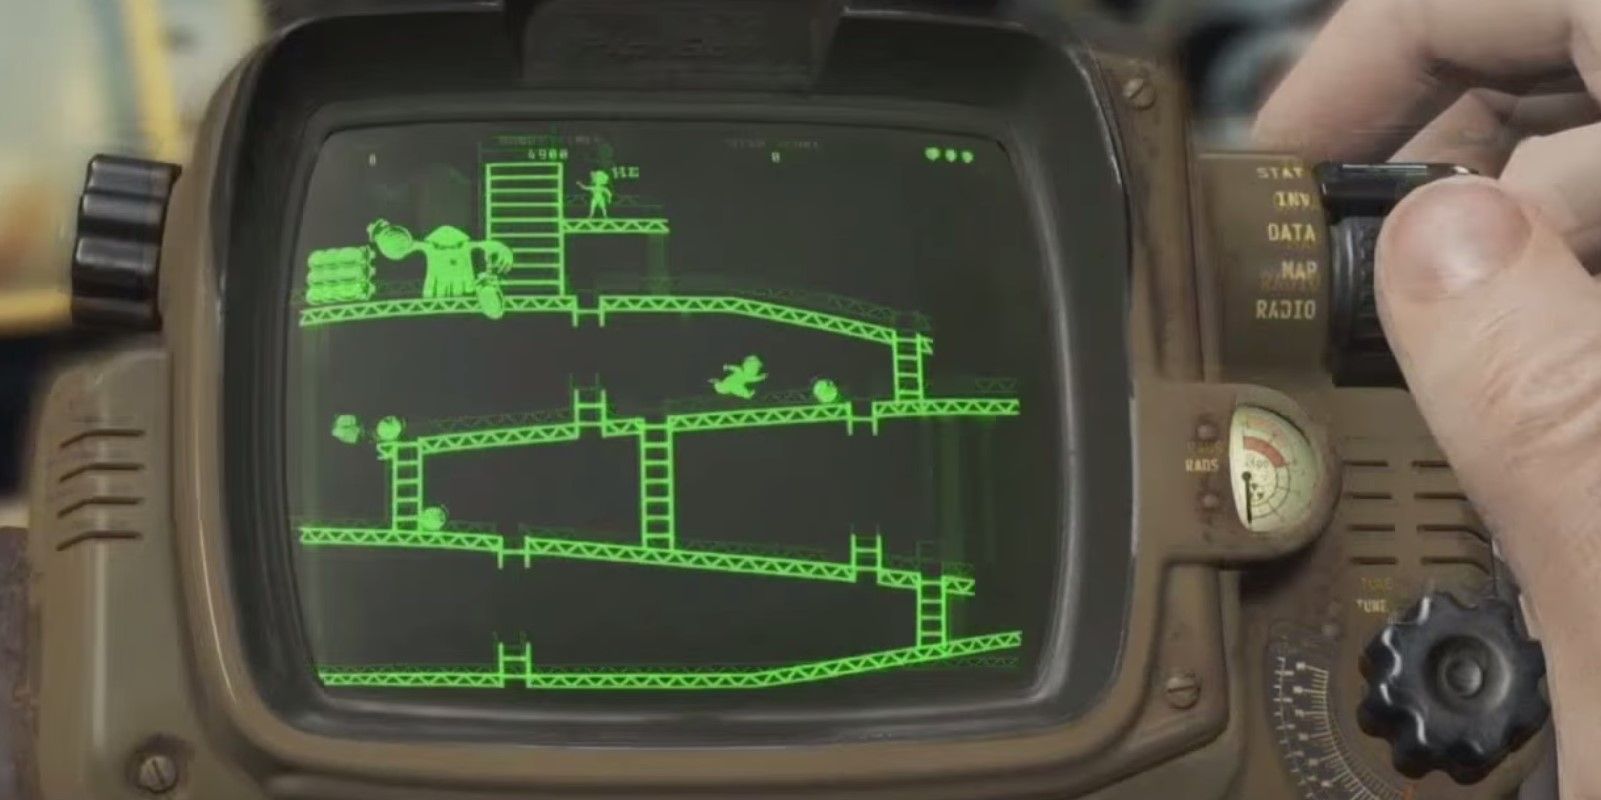 fallout 4 console command save